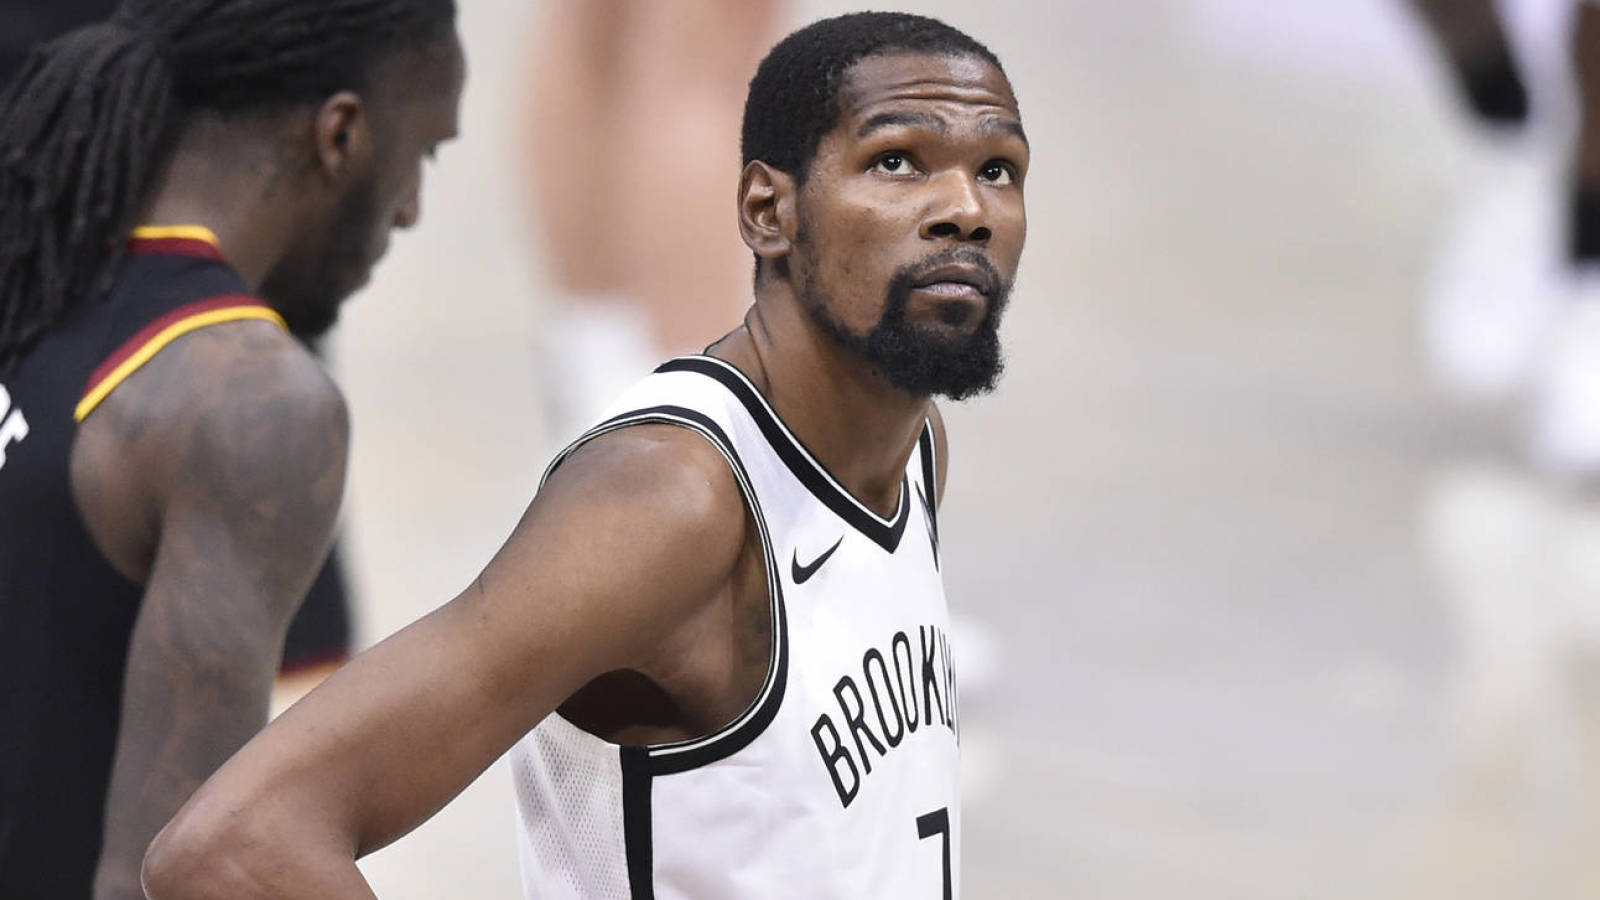 Kevin Durant won't play Friday in Nets-Cavaliers game